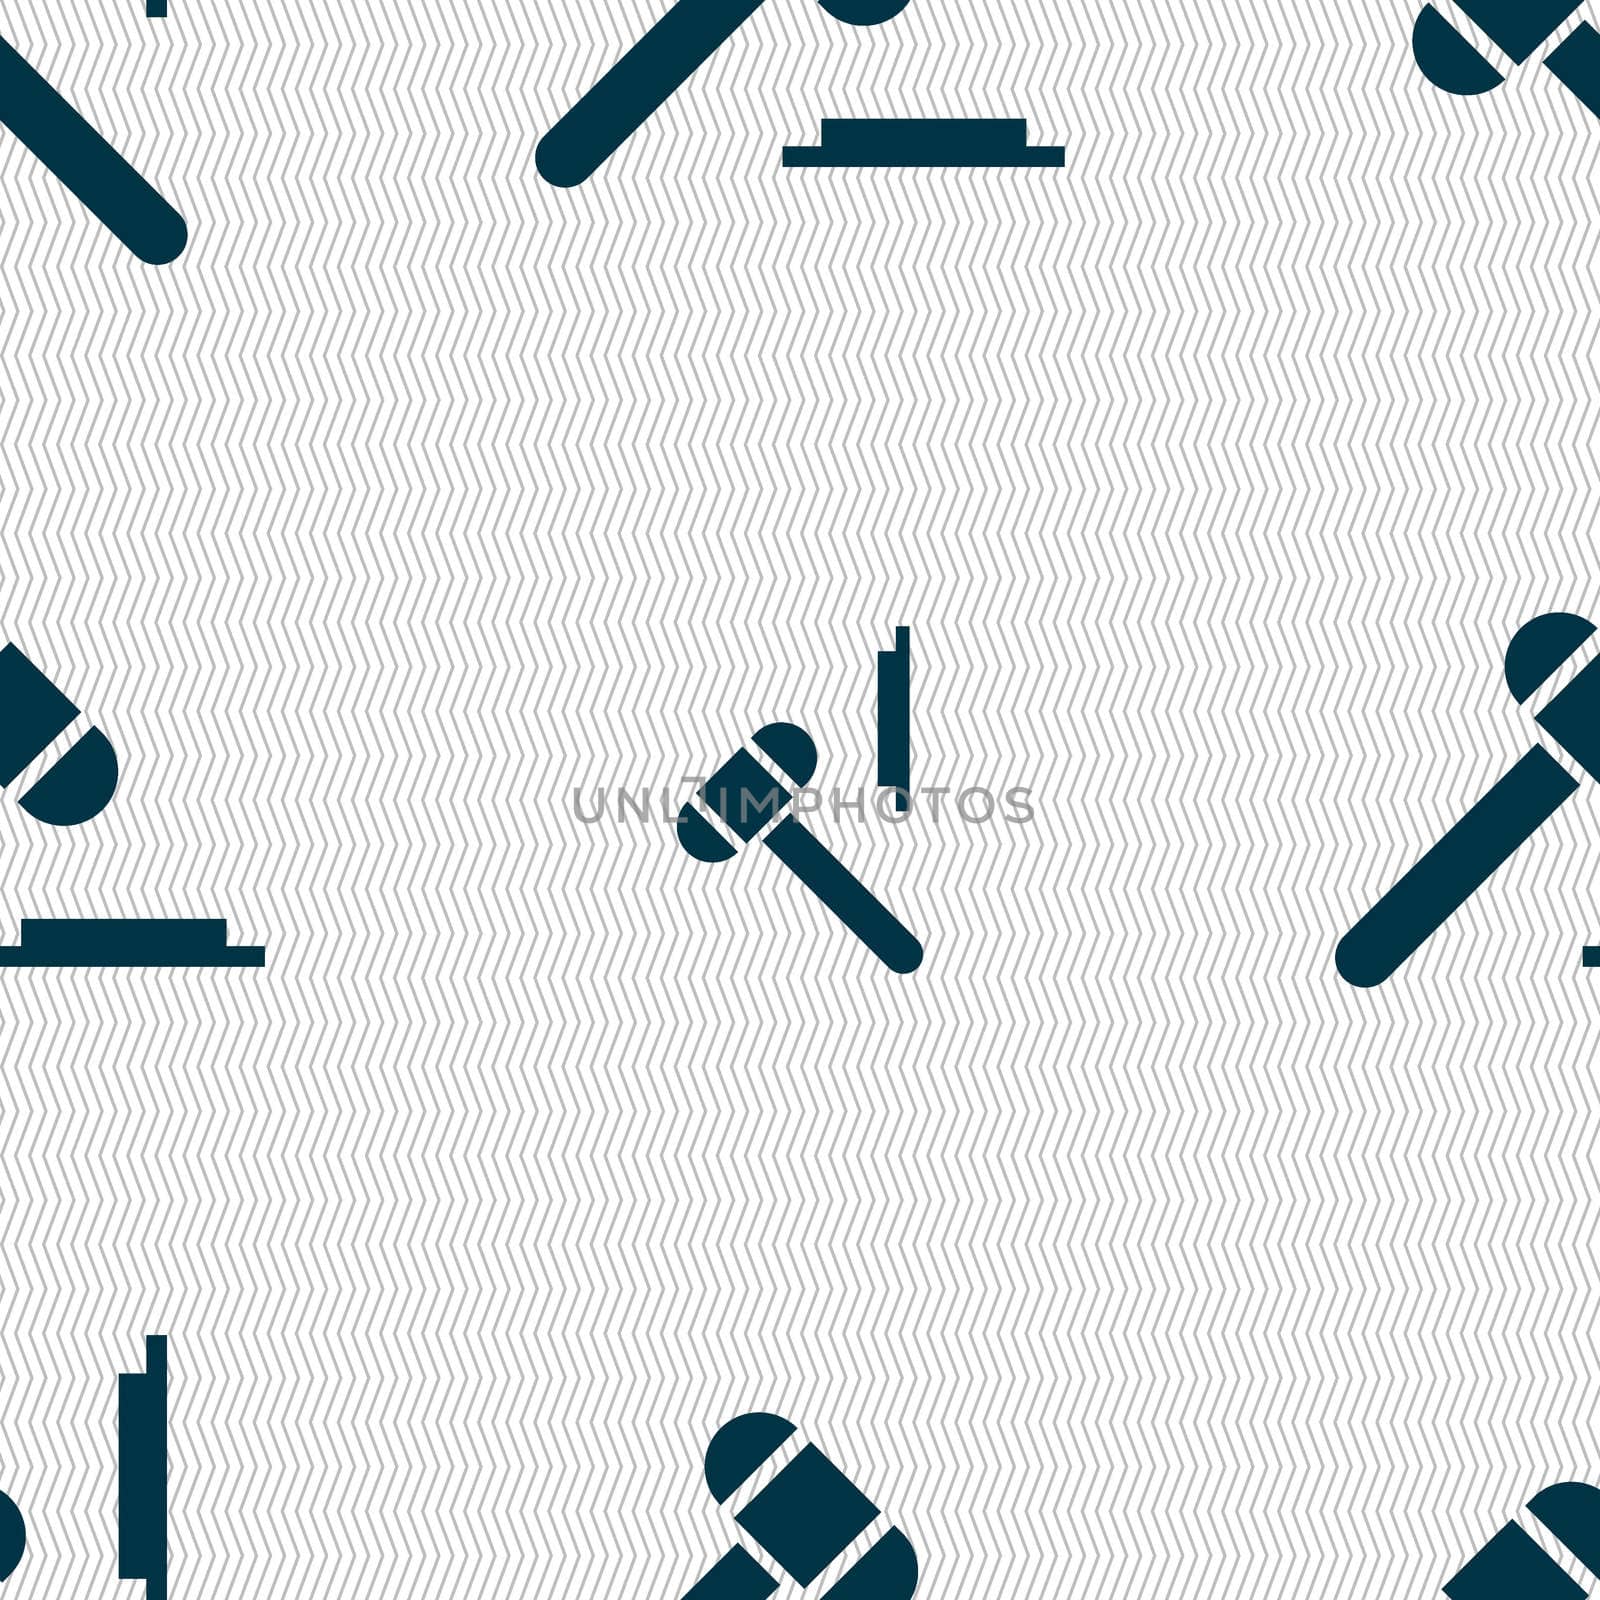 judge hammer icon. Seamless abstract background with geometric shapes. illustration